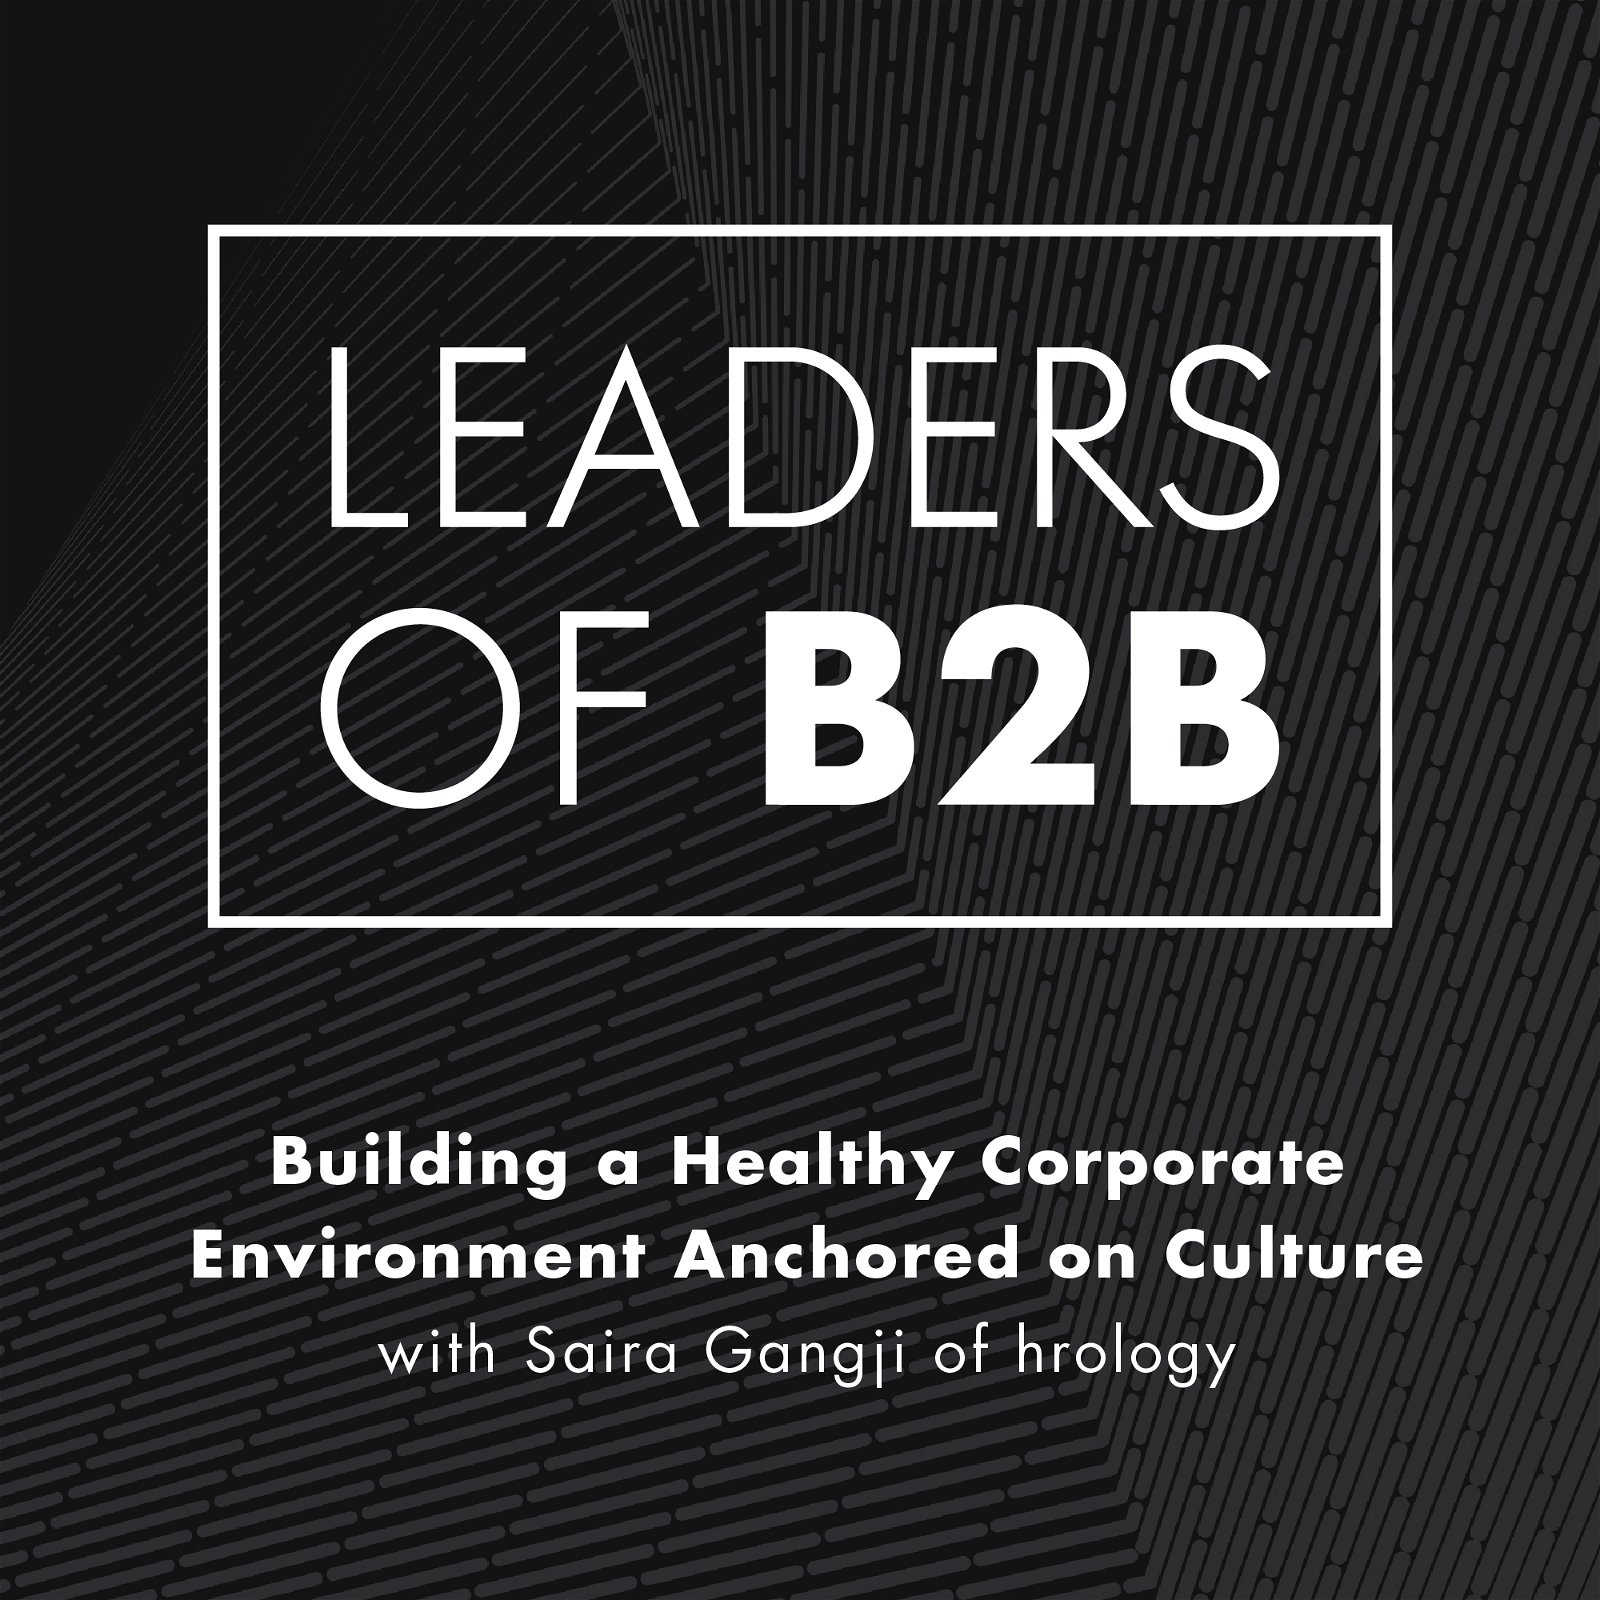 Building a Healthy Corporate Environment Anchored on Culture with Saira Gangji of hrology